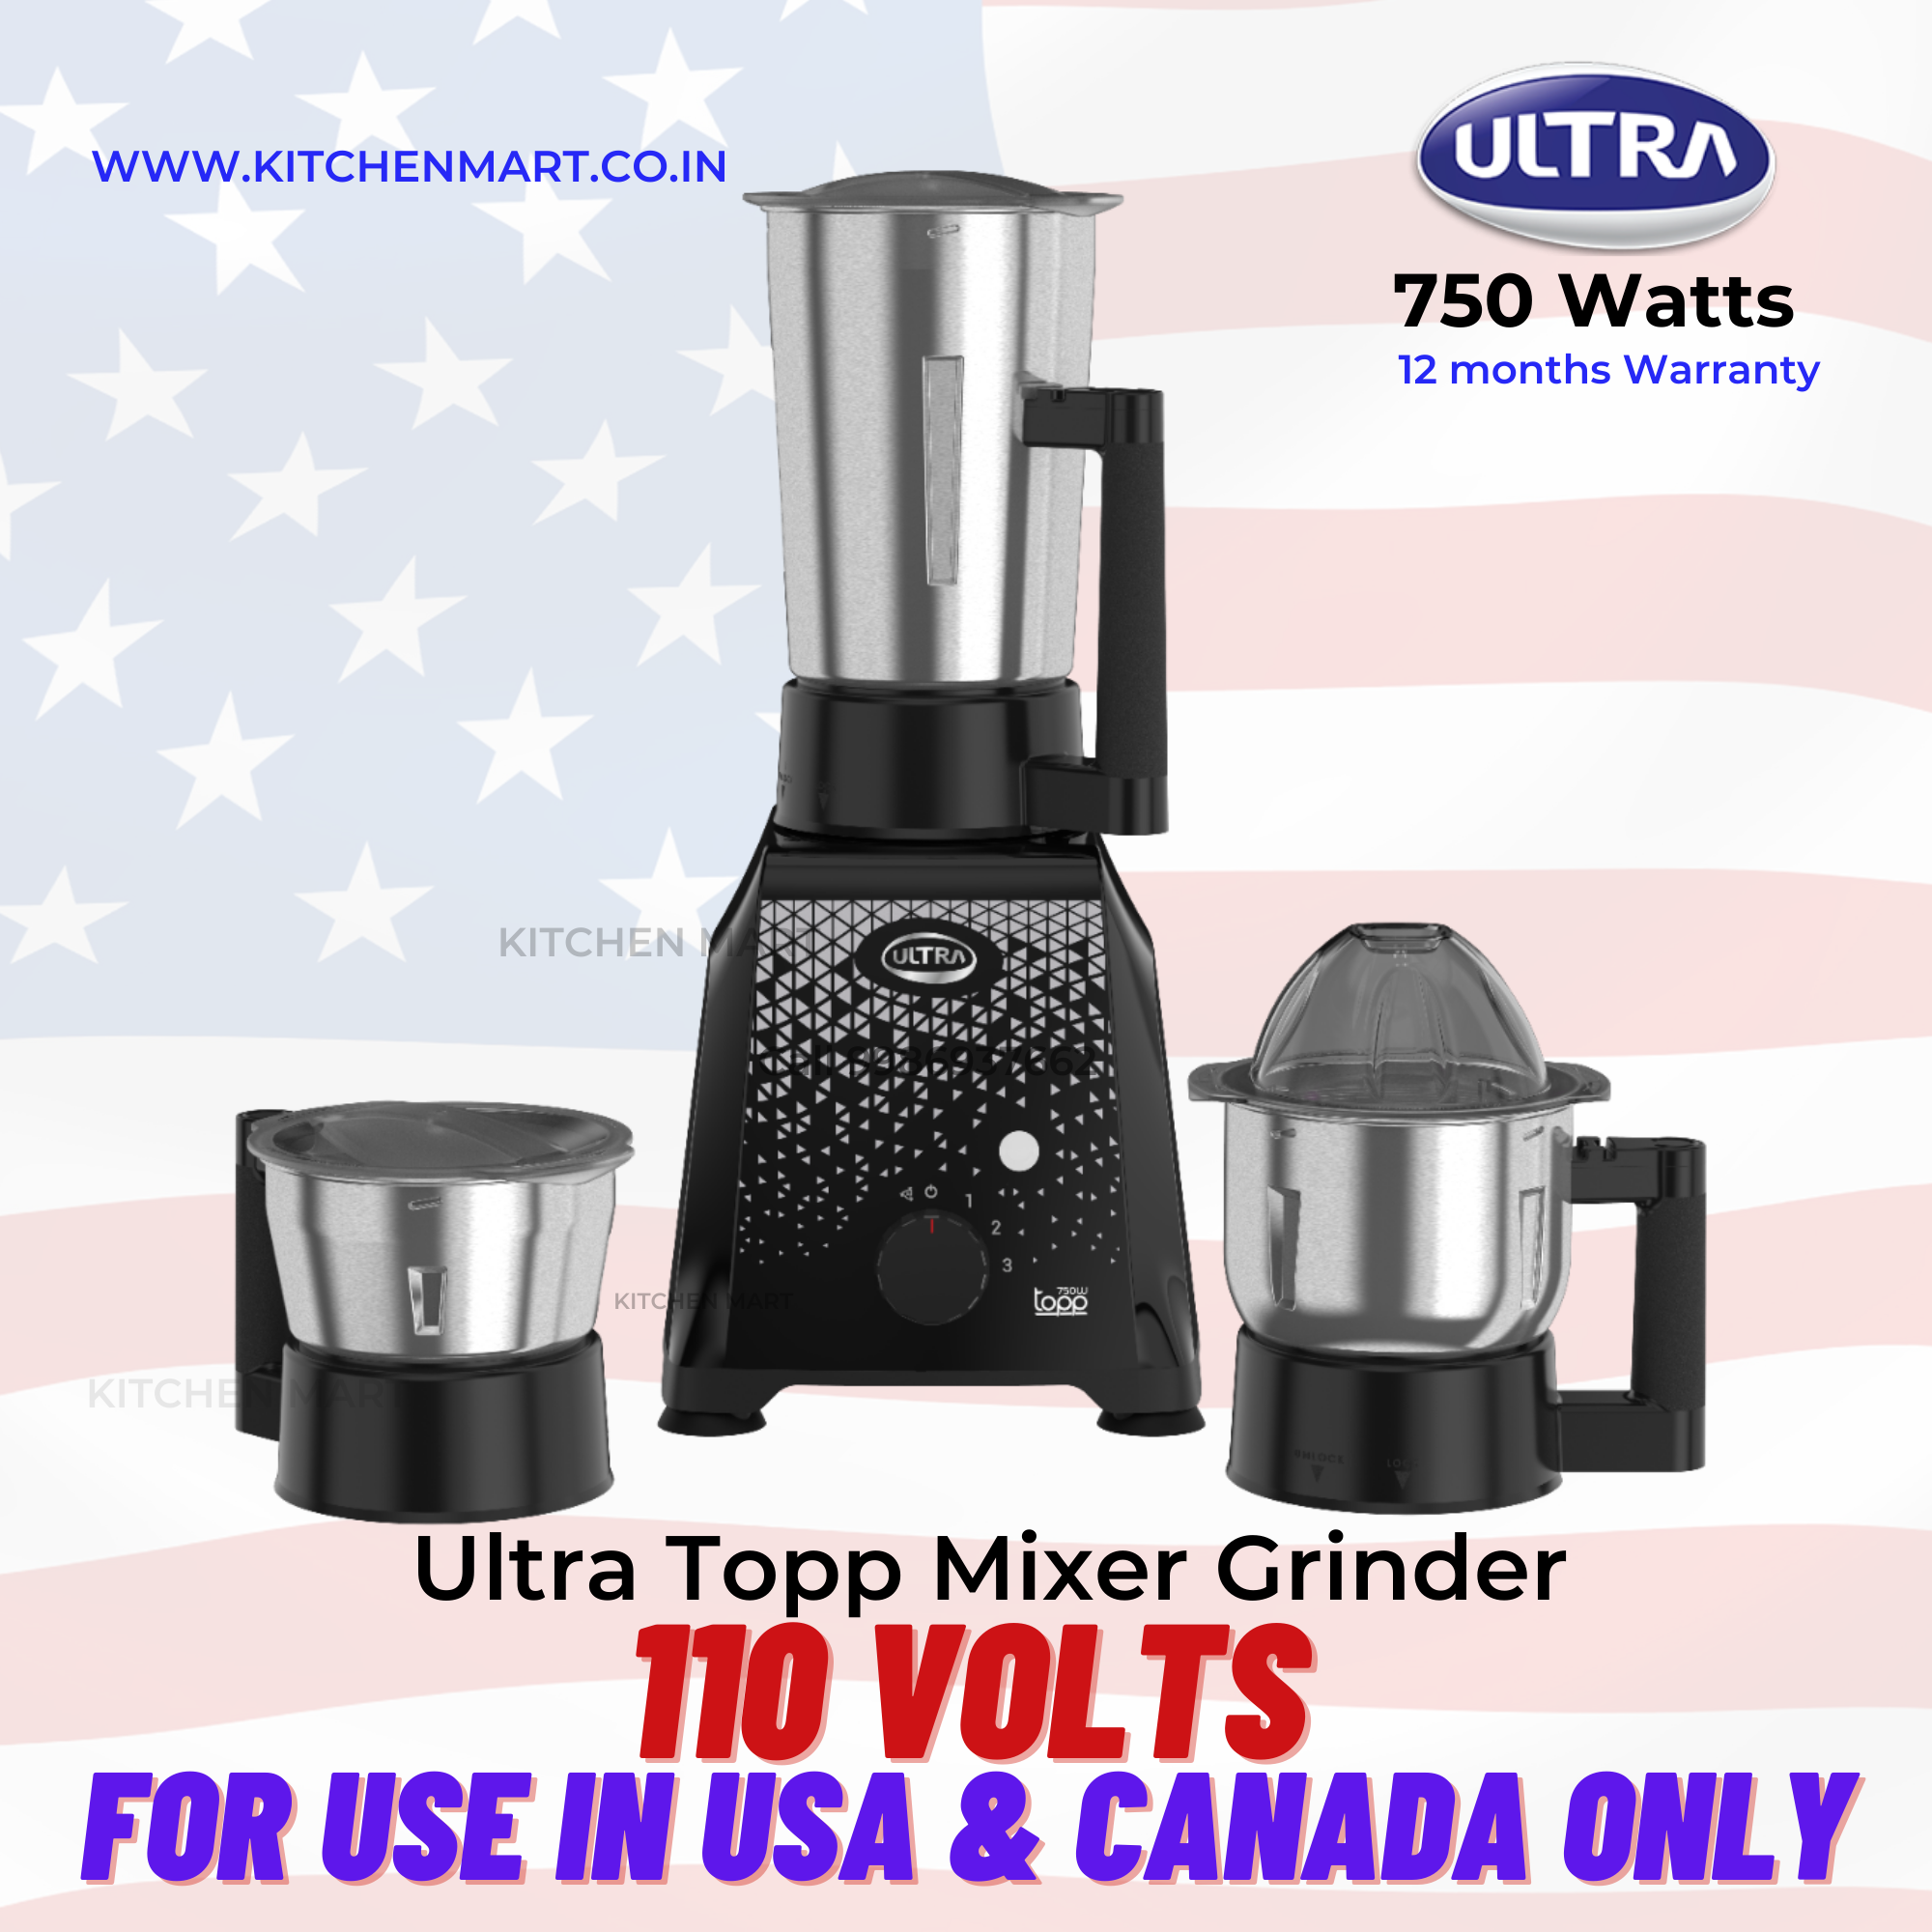 Ultra Topp 110volts 750W Mixer Grinder ( 3 Jars, Jet Black ) for use in USA and canada only